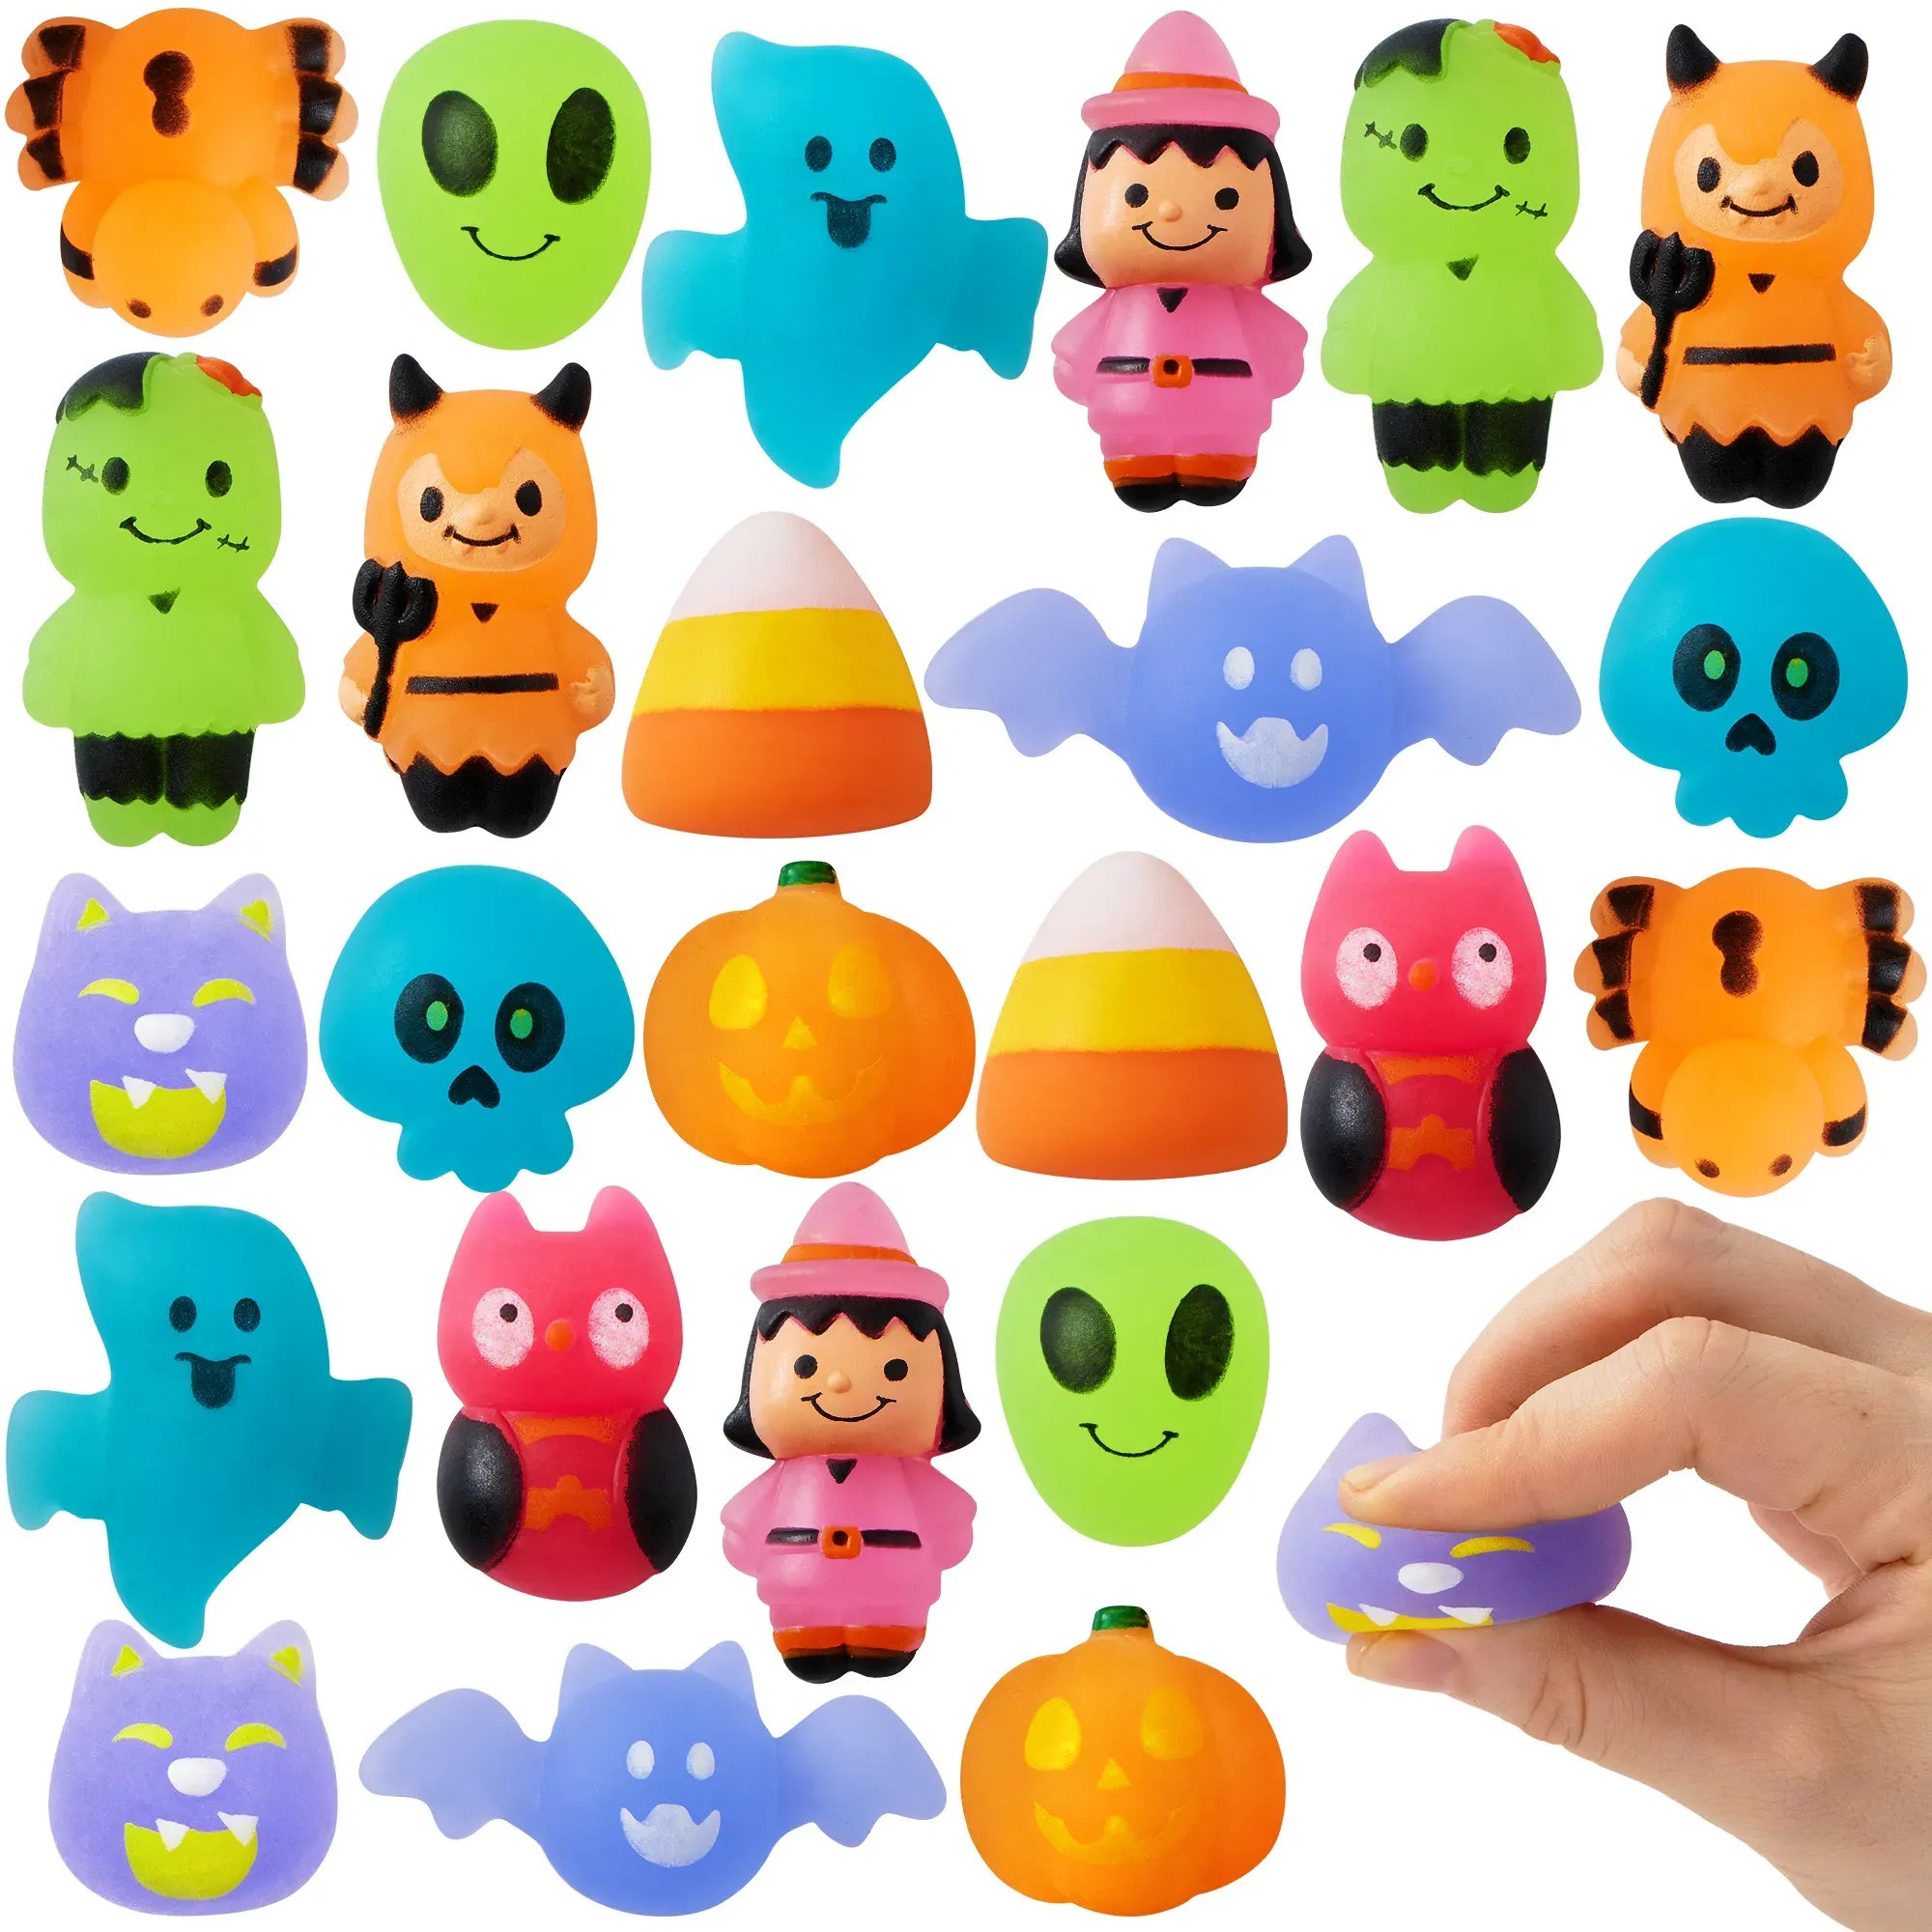 JOYIN Halloween Squishy Coloring Craft Kit with 6 Different